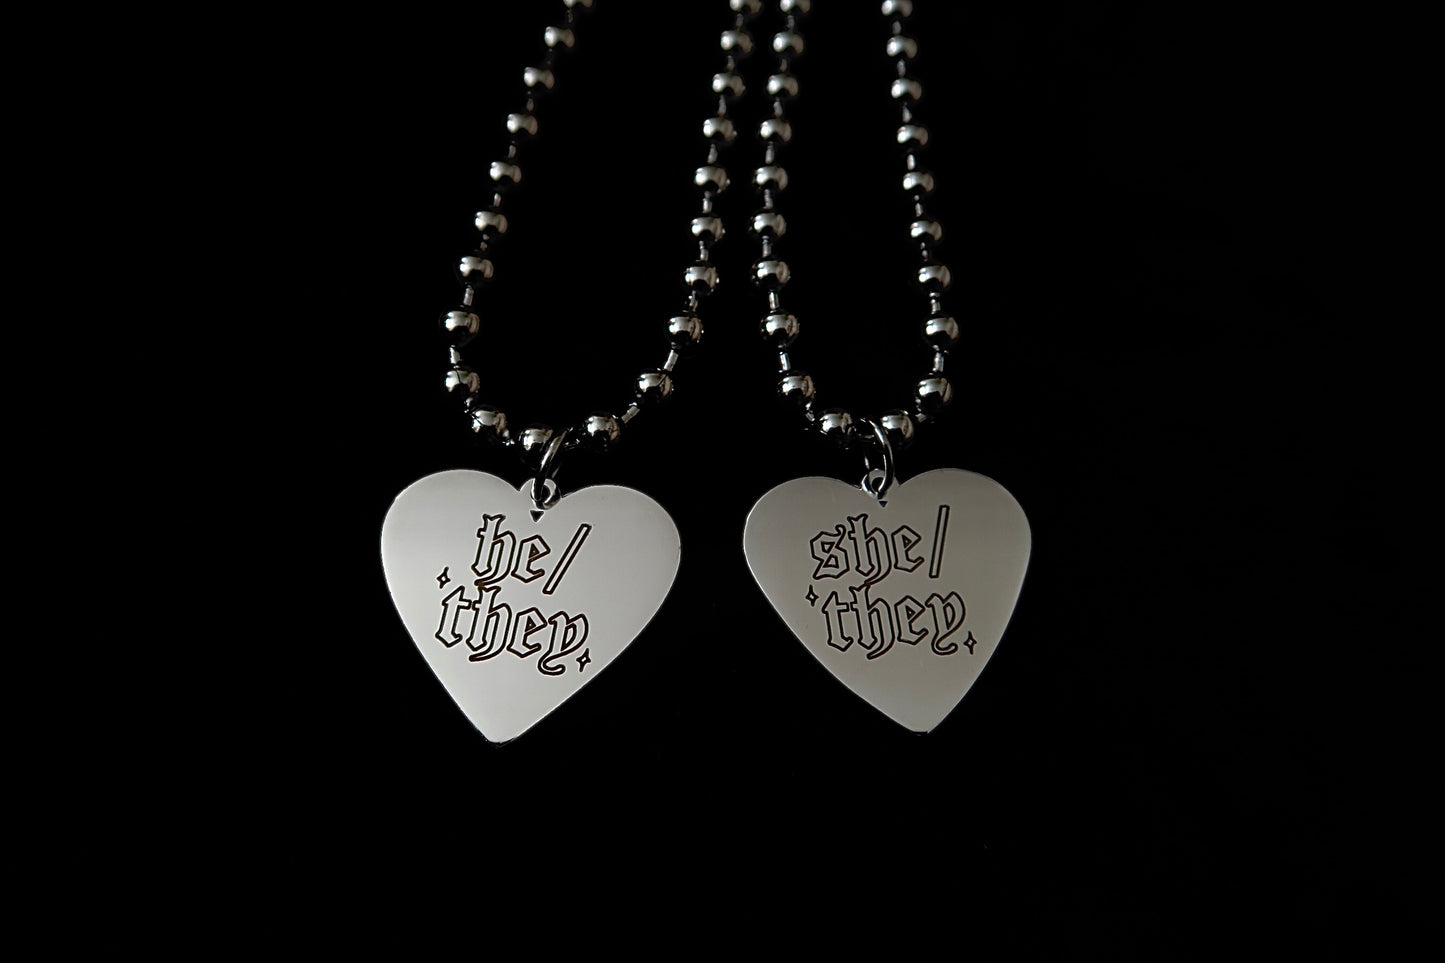 he/they ✮ she/they heart ball chain necklace